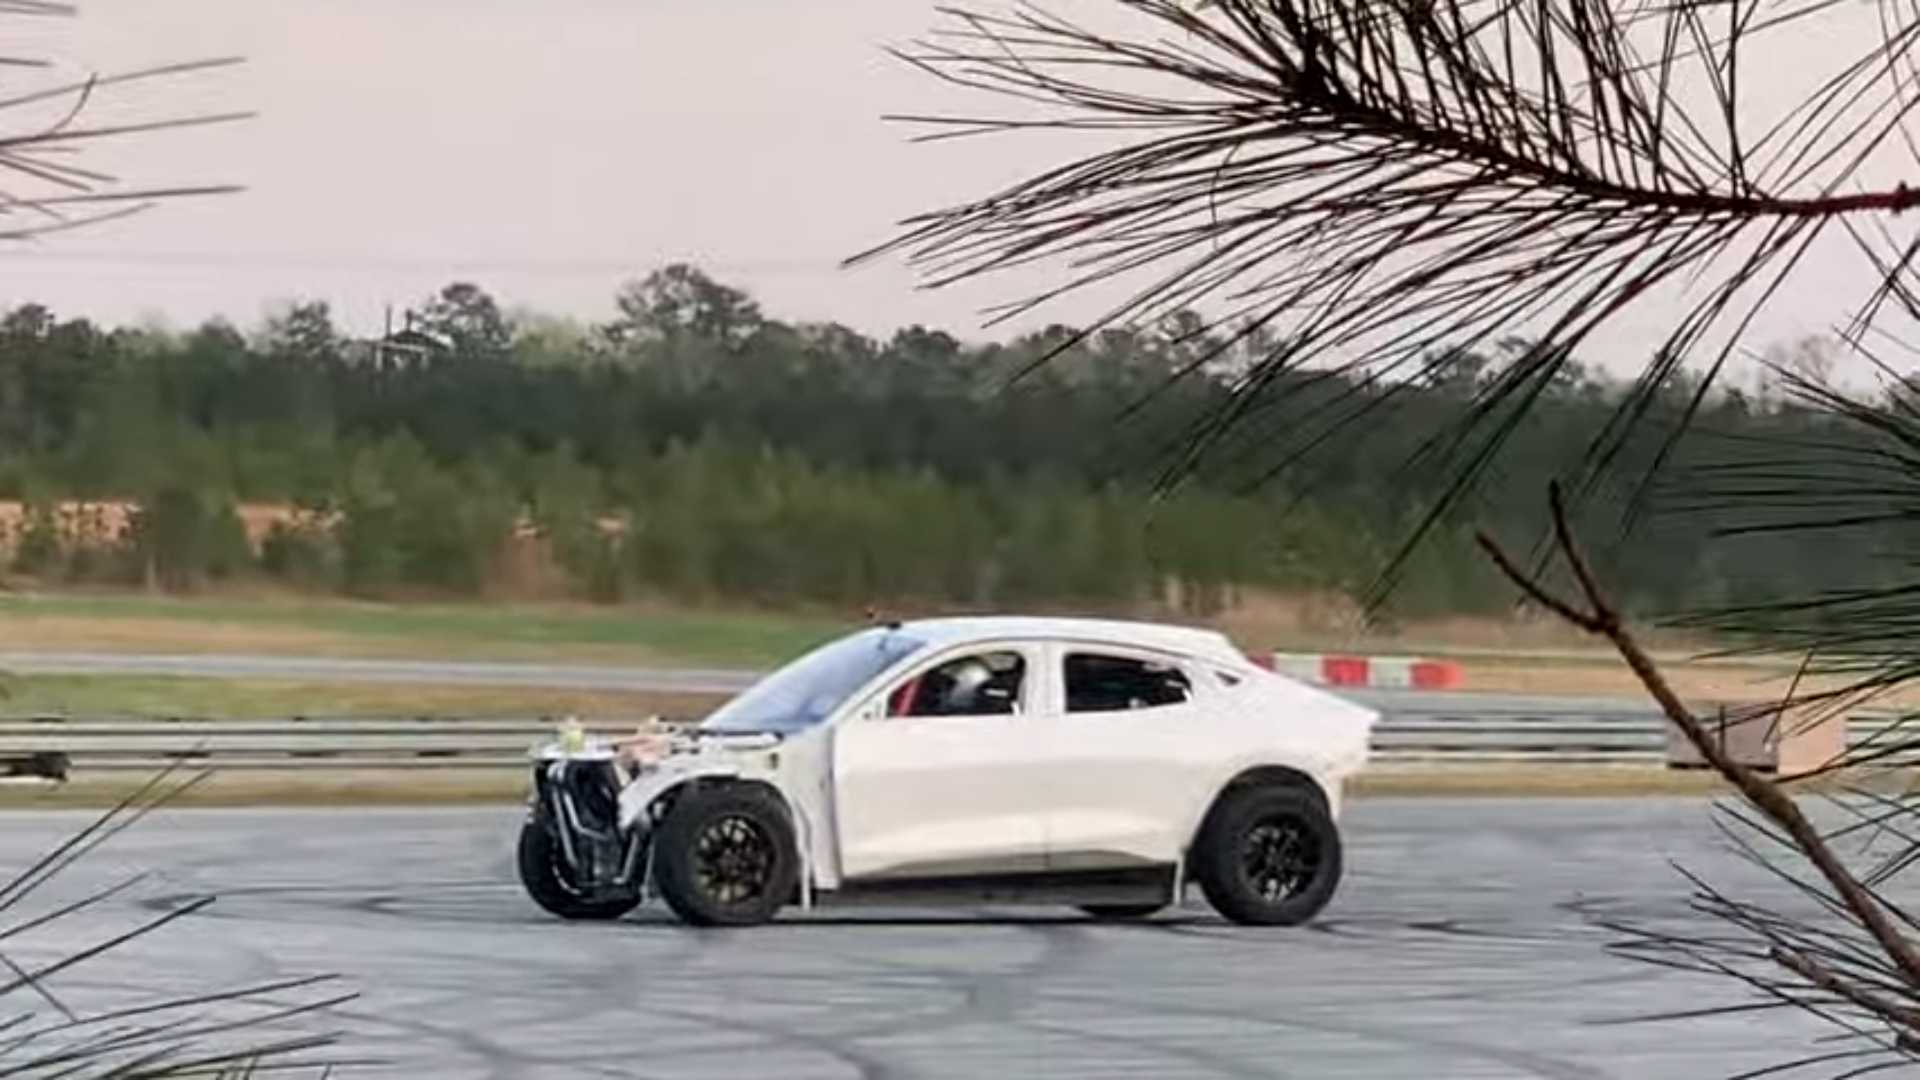 What Is Ford Doing In The Woods With This Crazy Mustang Mach-E?